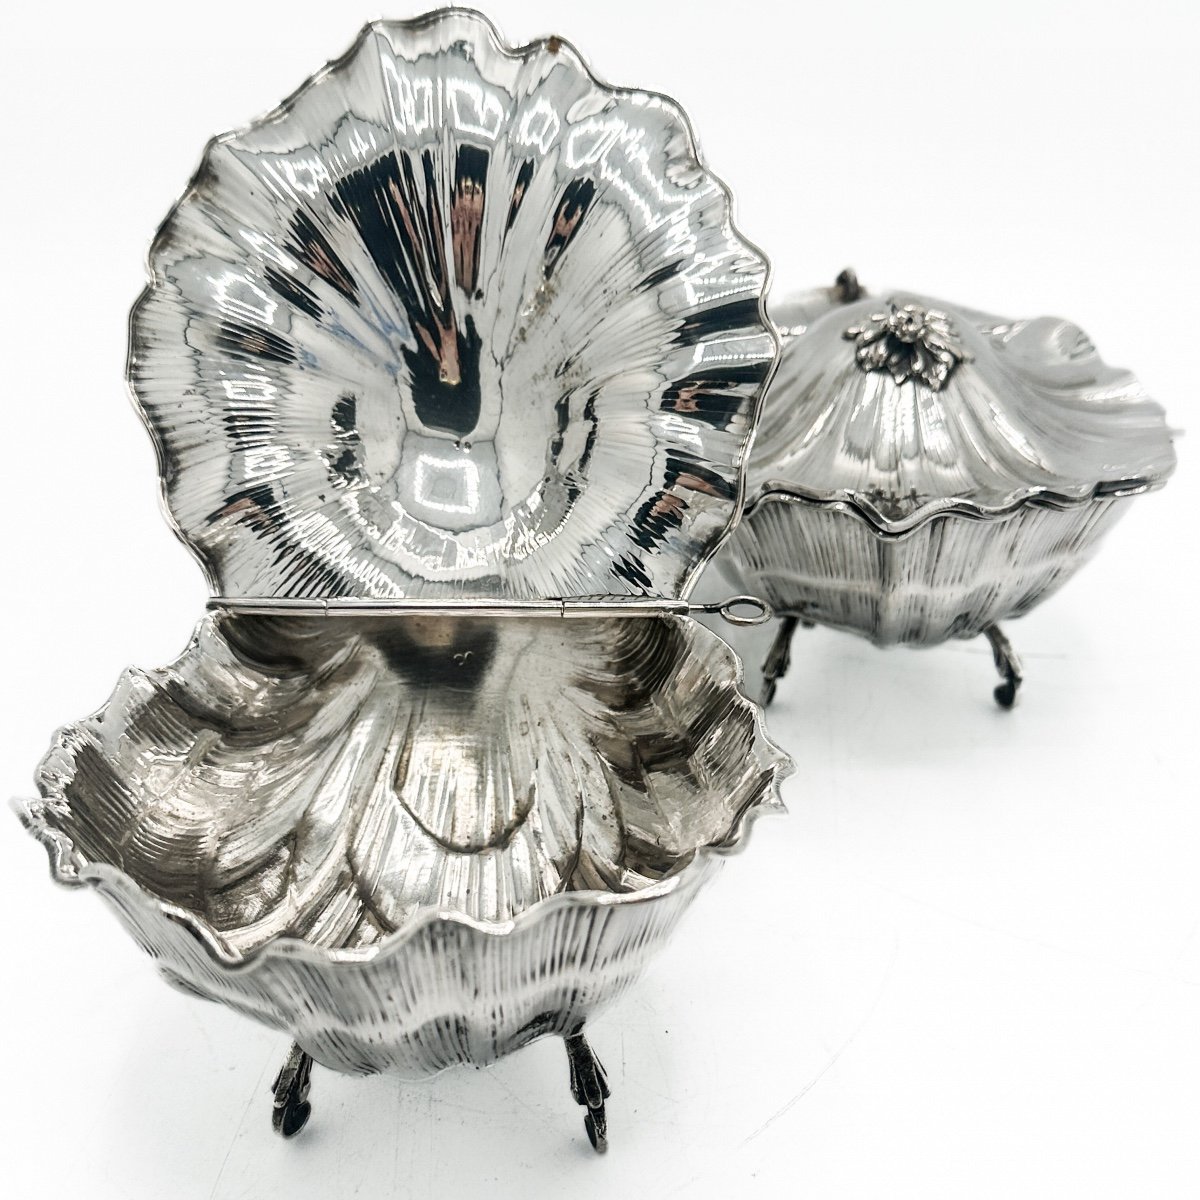 Pair Of Biscuit Boxes In Sterling Silver 800 Italian Work From The 1950s-photo-2